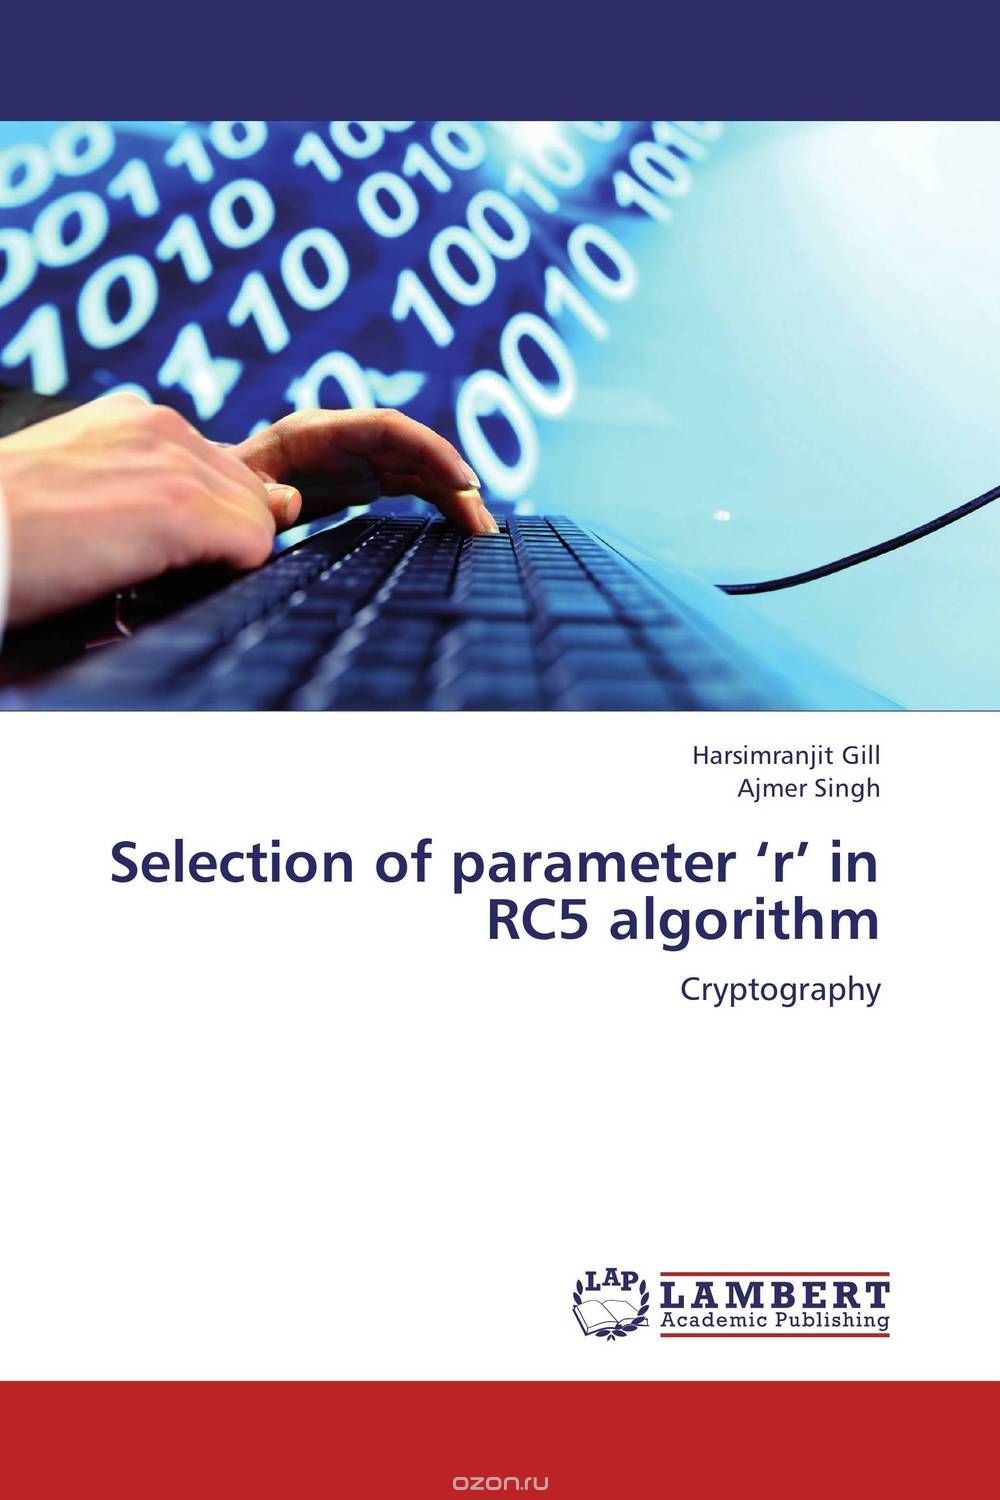 Selection of parameter ‘r’ in RC5 algorithm